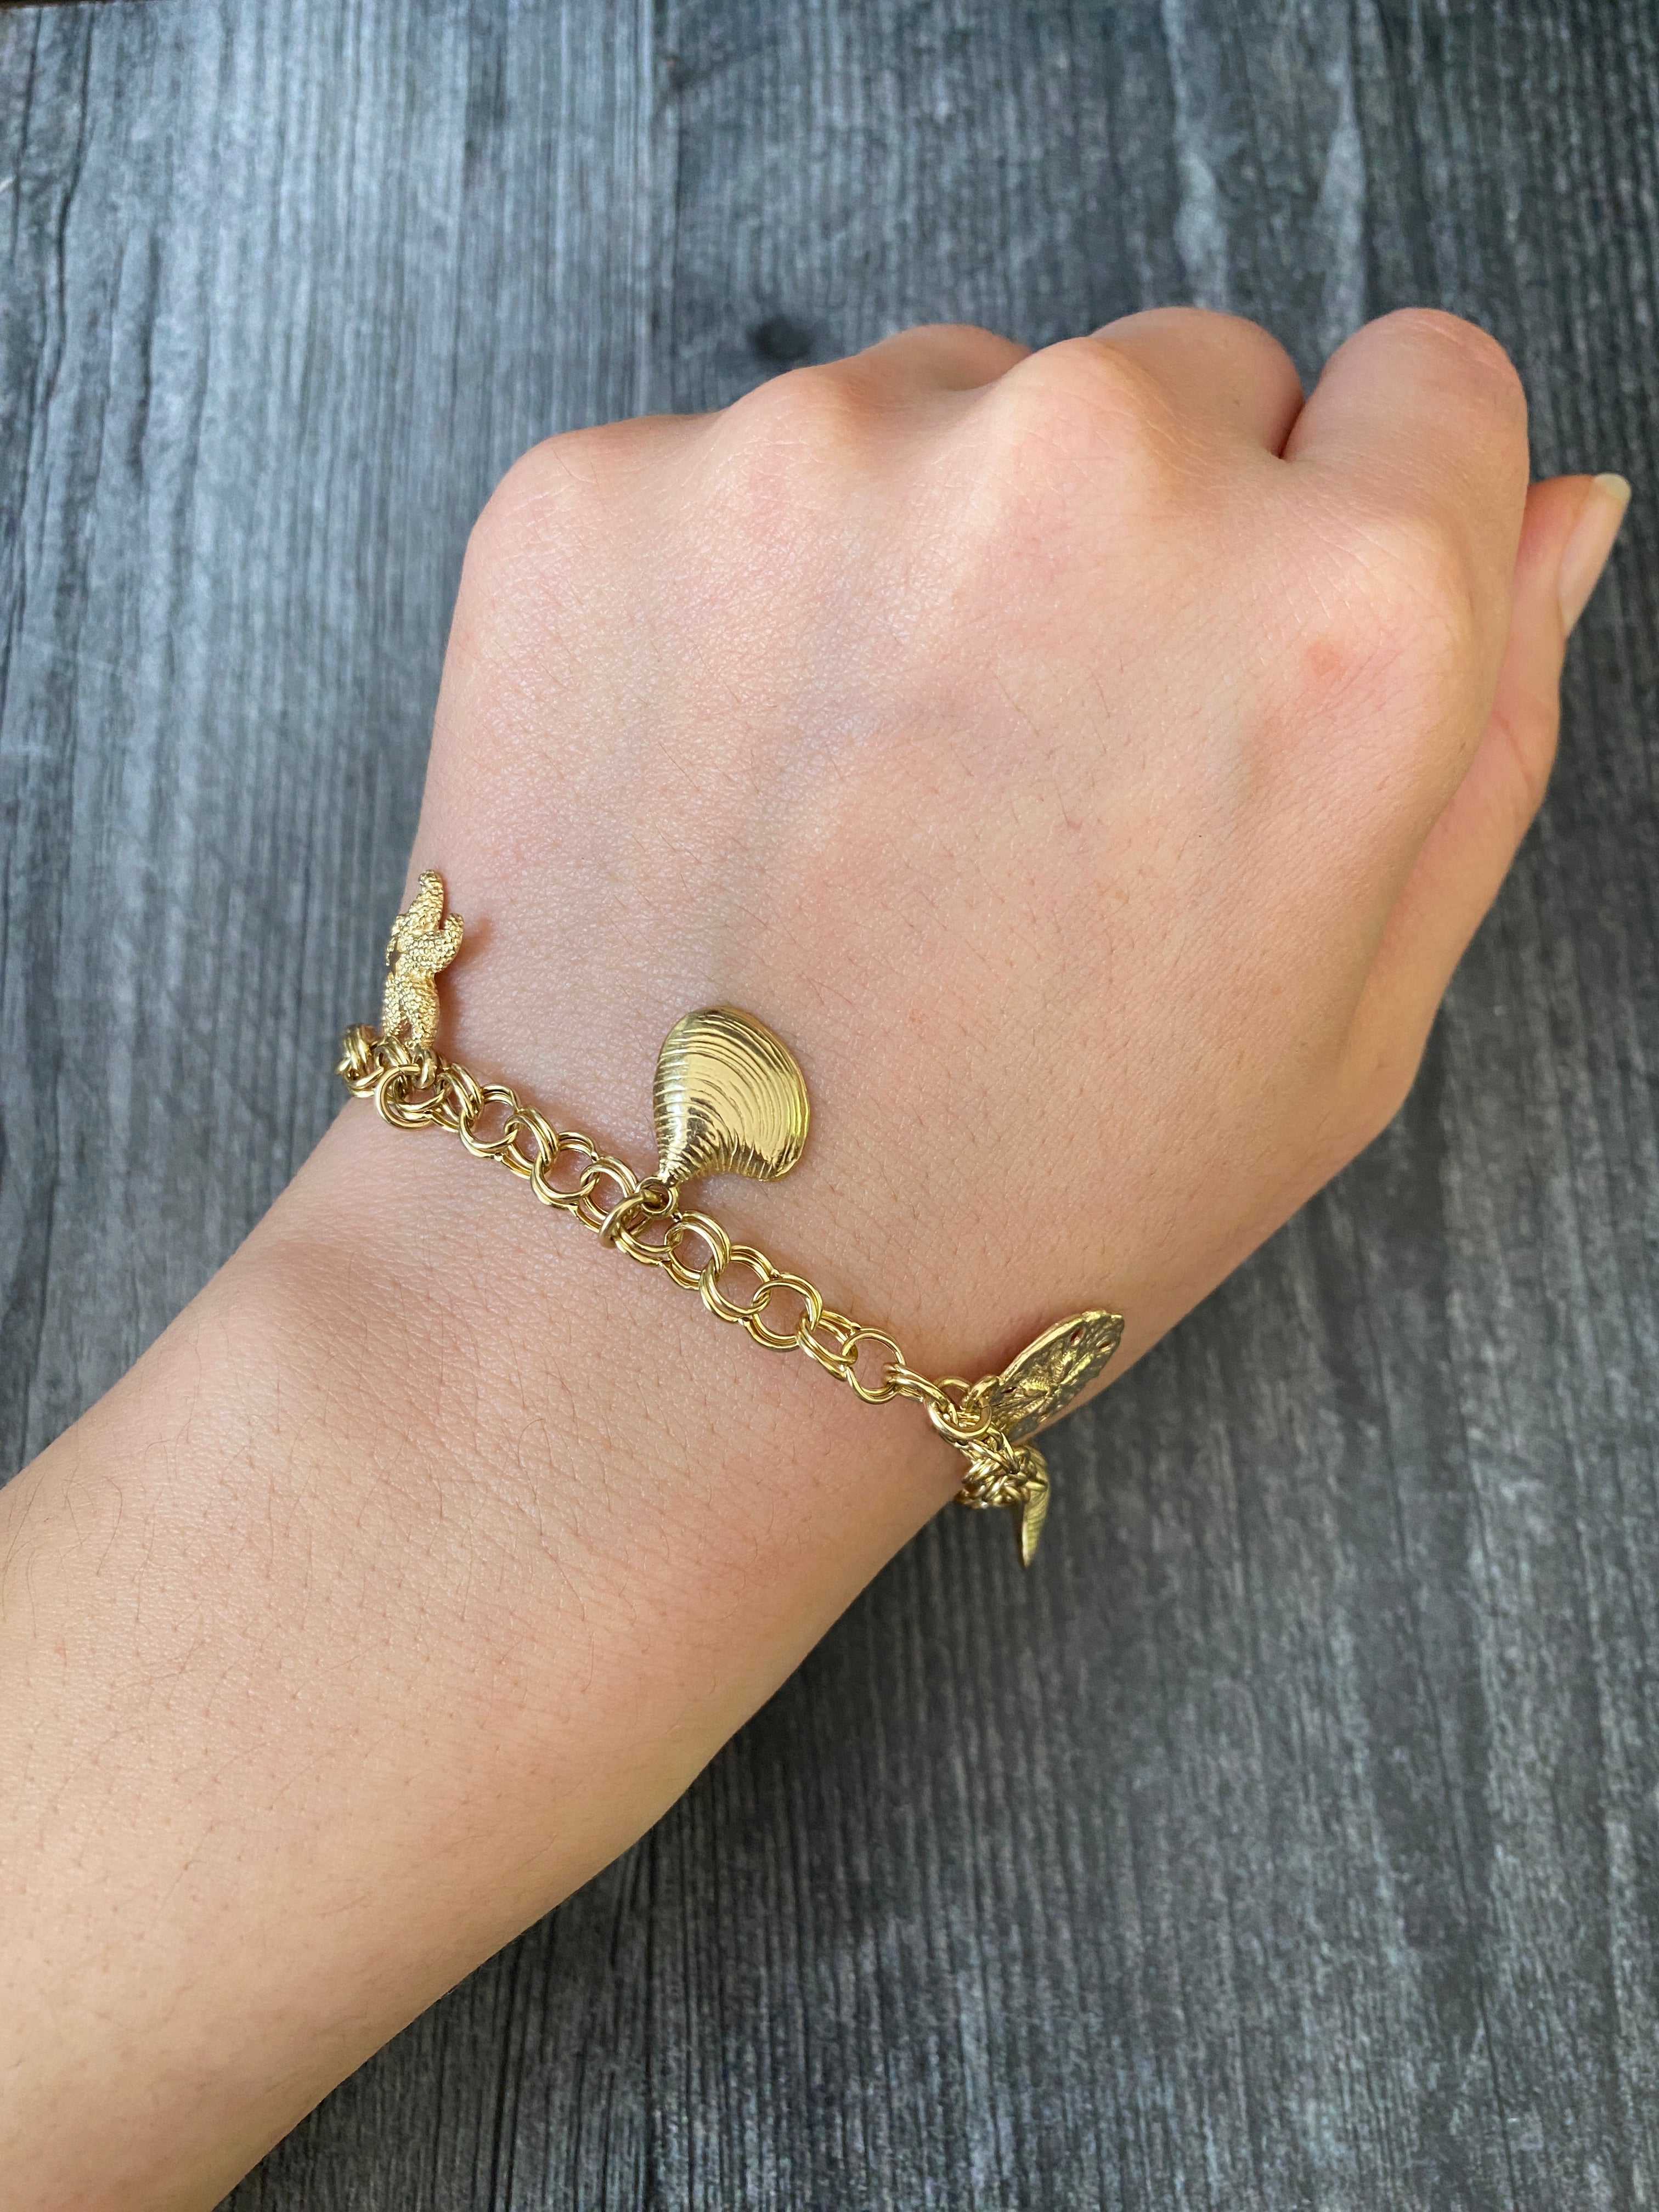 Build Your Own Gold & Rose Charm Bracelet | Handmade Jewelry | Cara O Sello